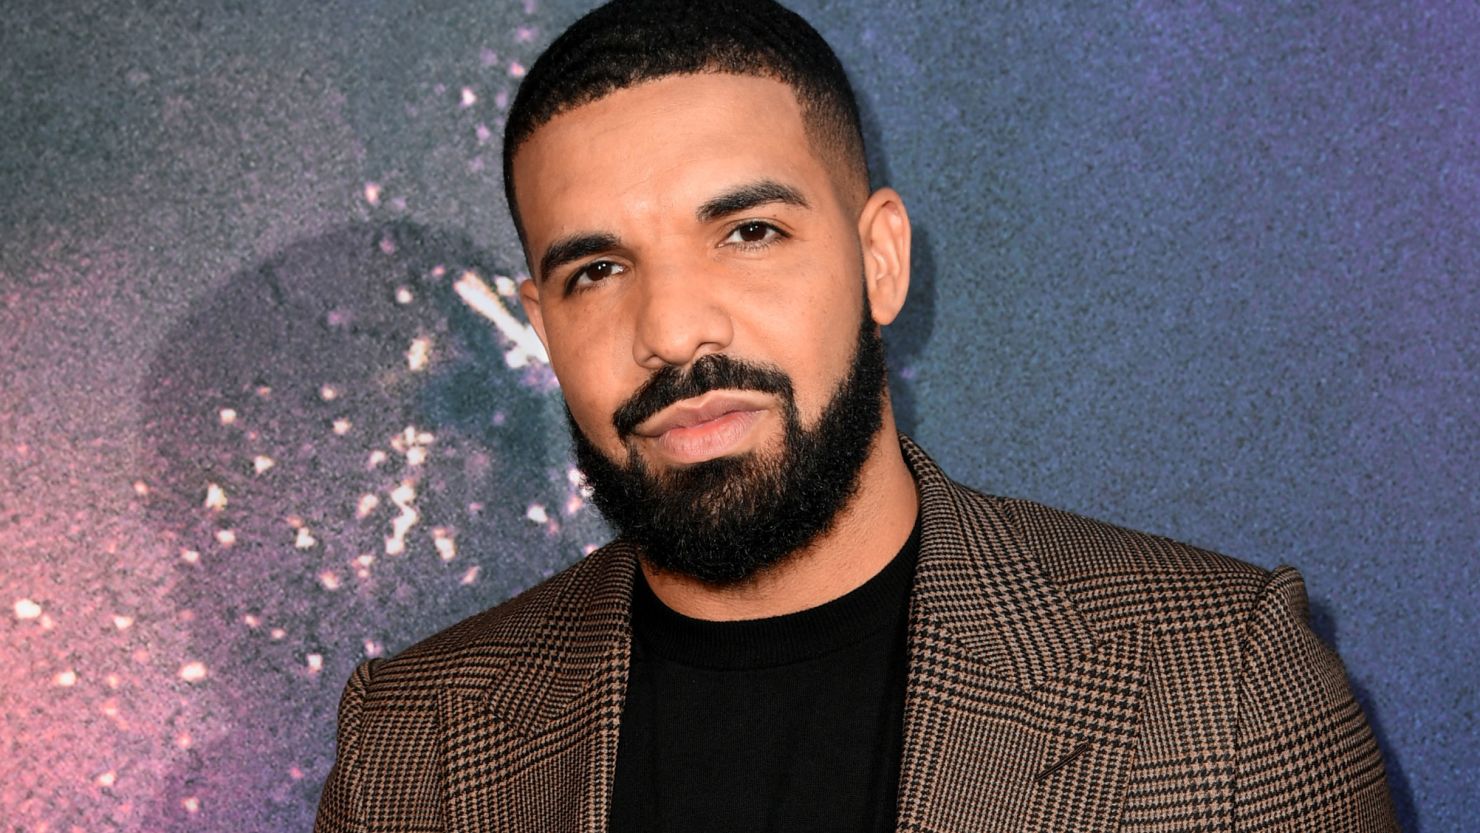 Canadian rapper Drake has shared rare pictures of his son Adonis.